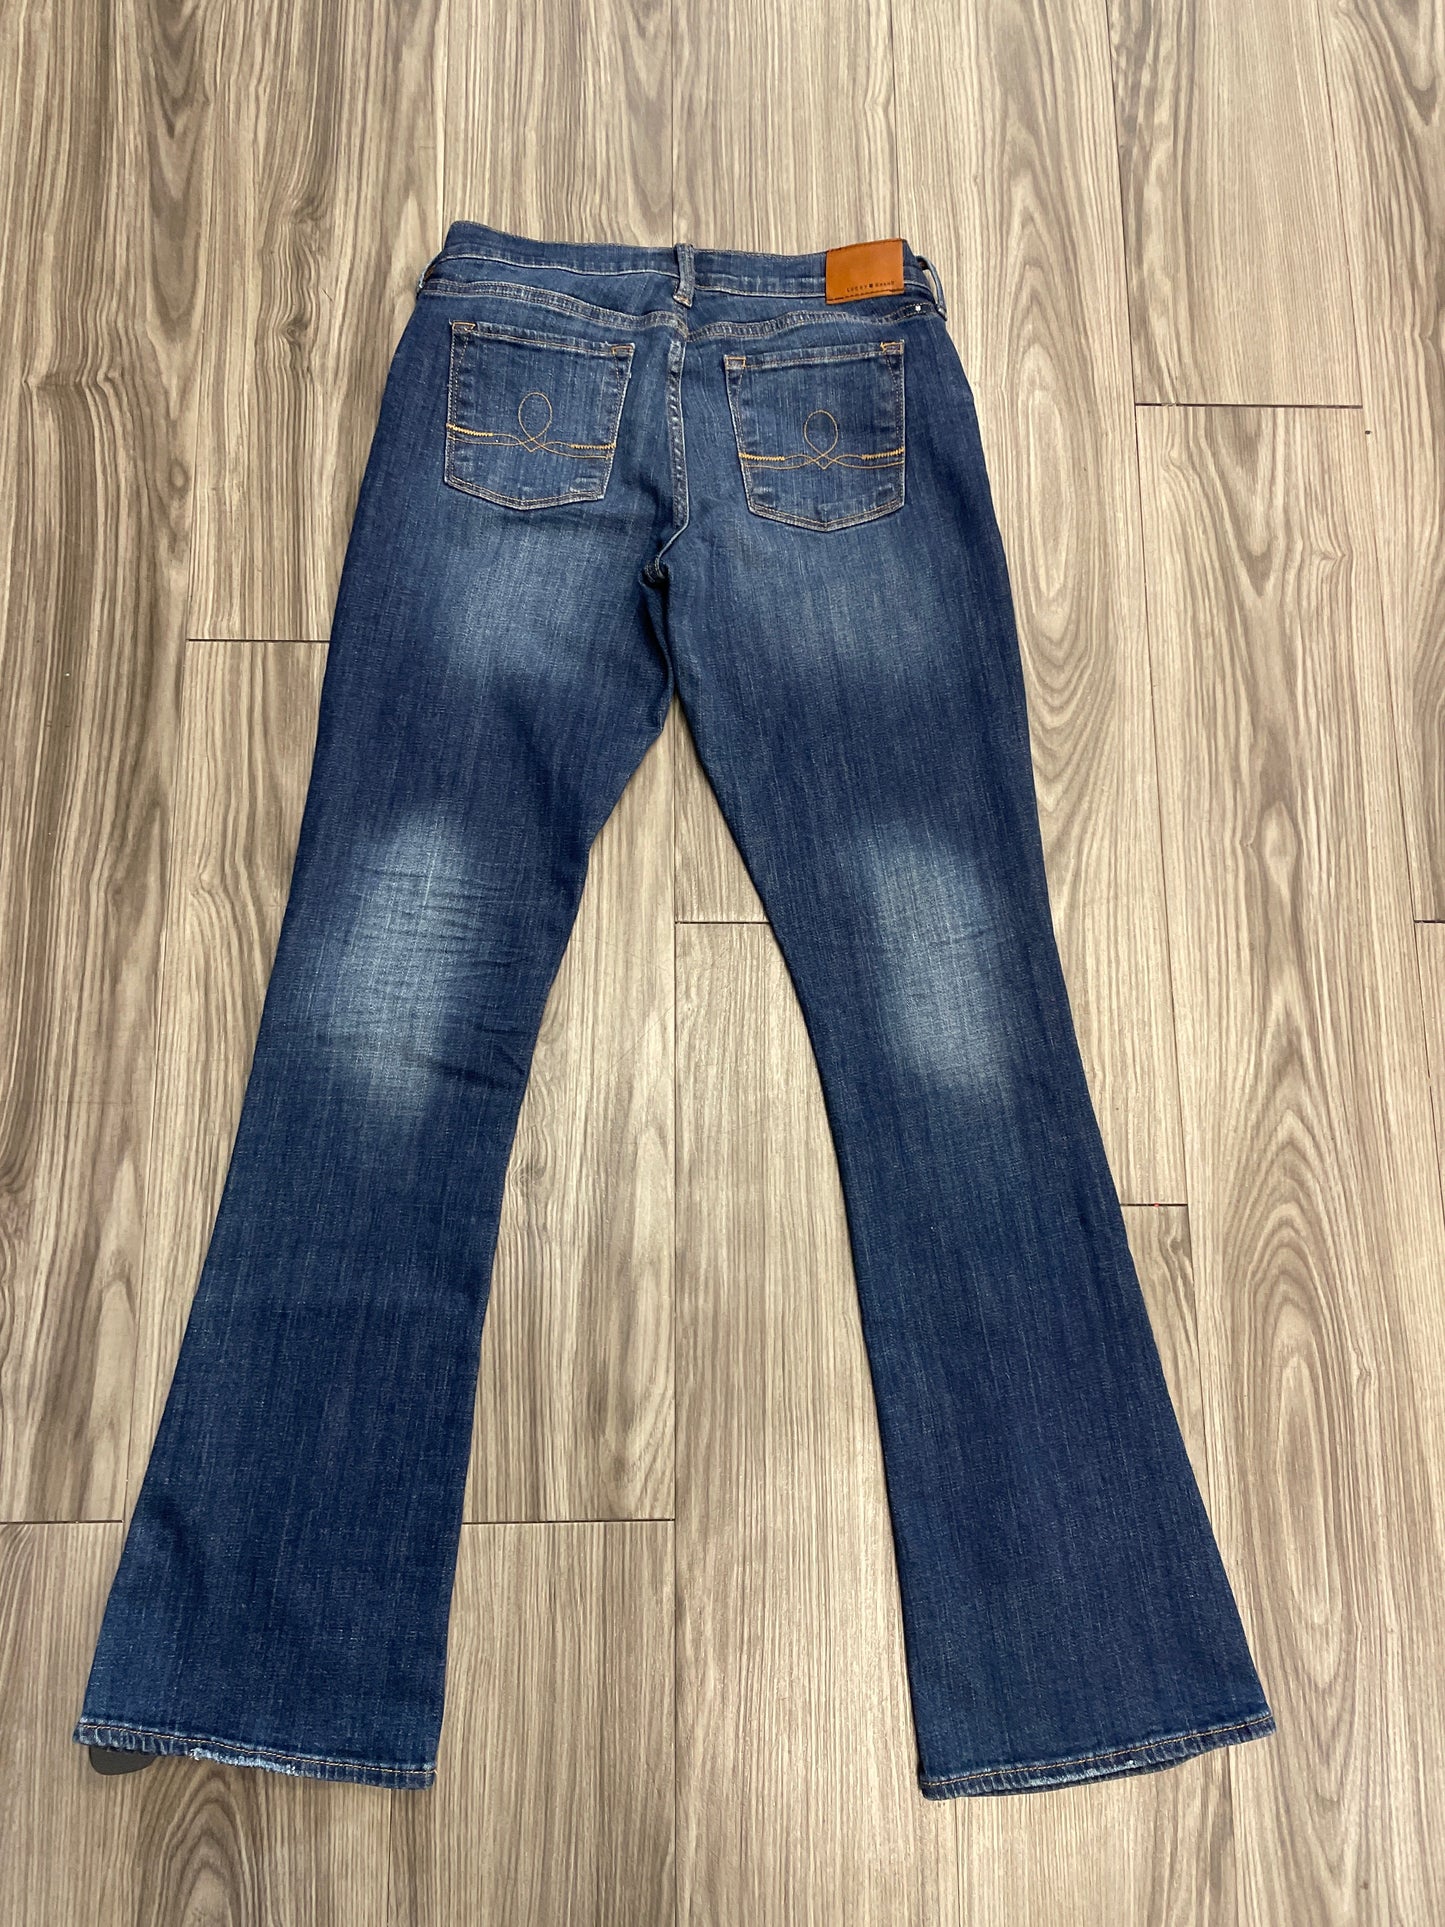 Jeans Boot Cut By Lucky Brand  Size: 6